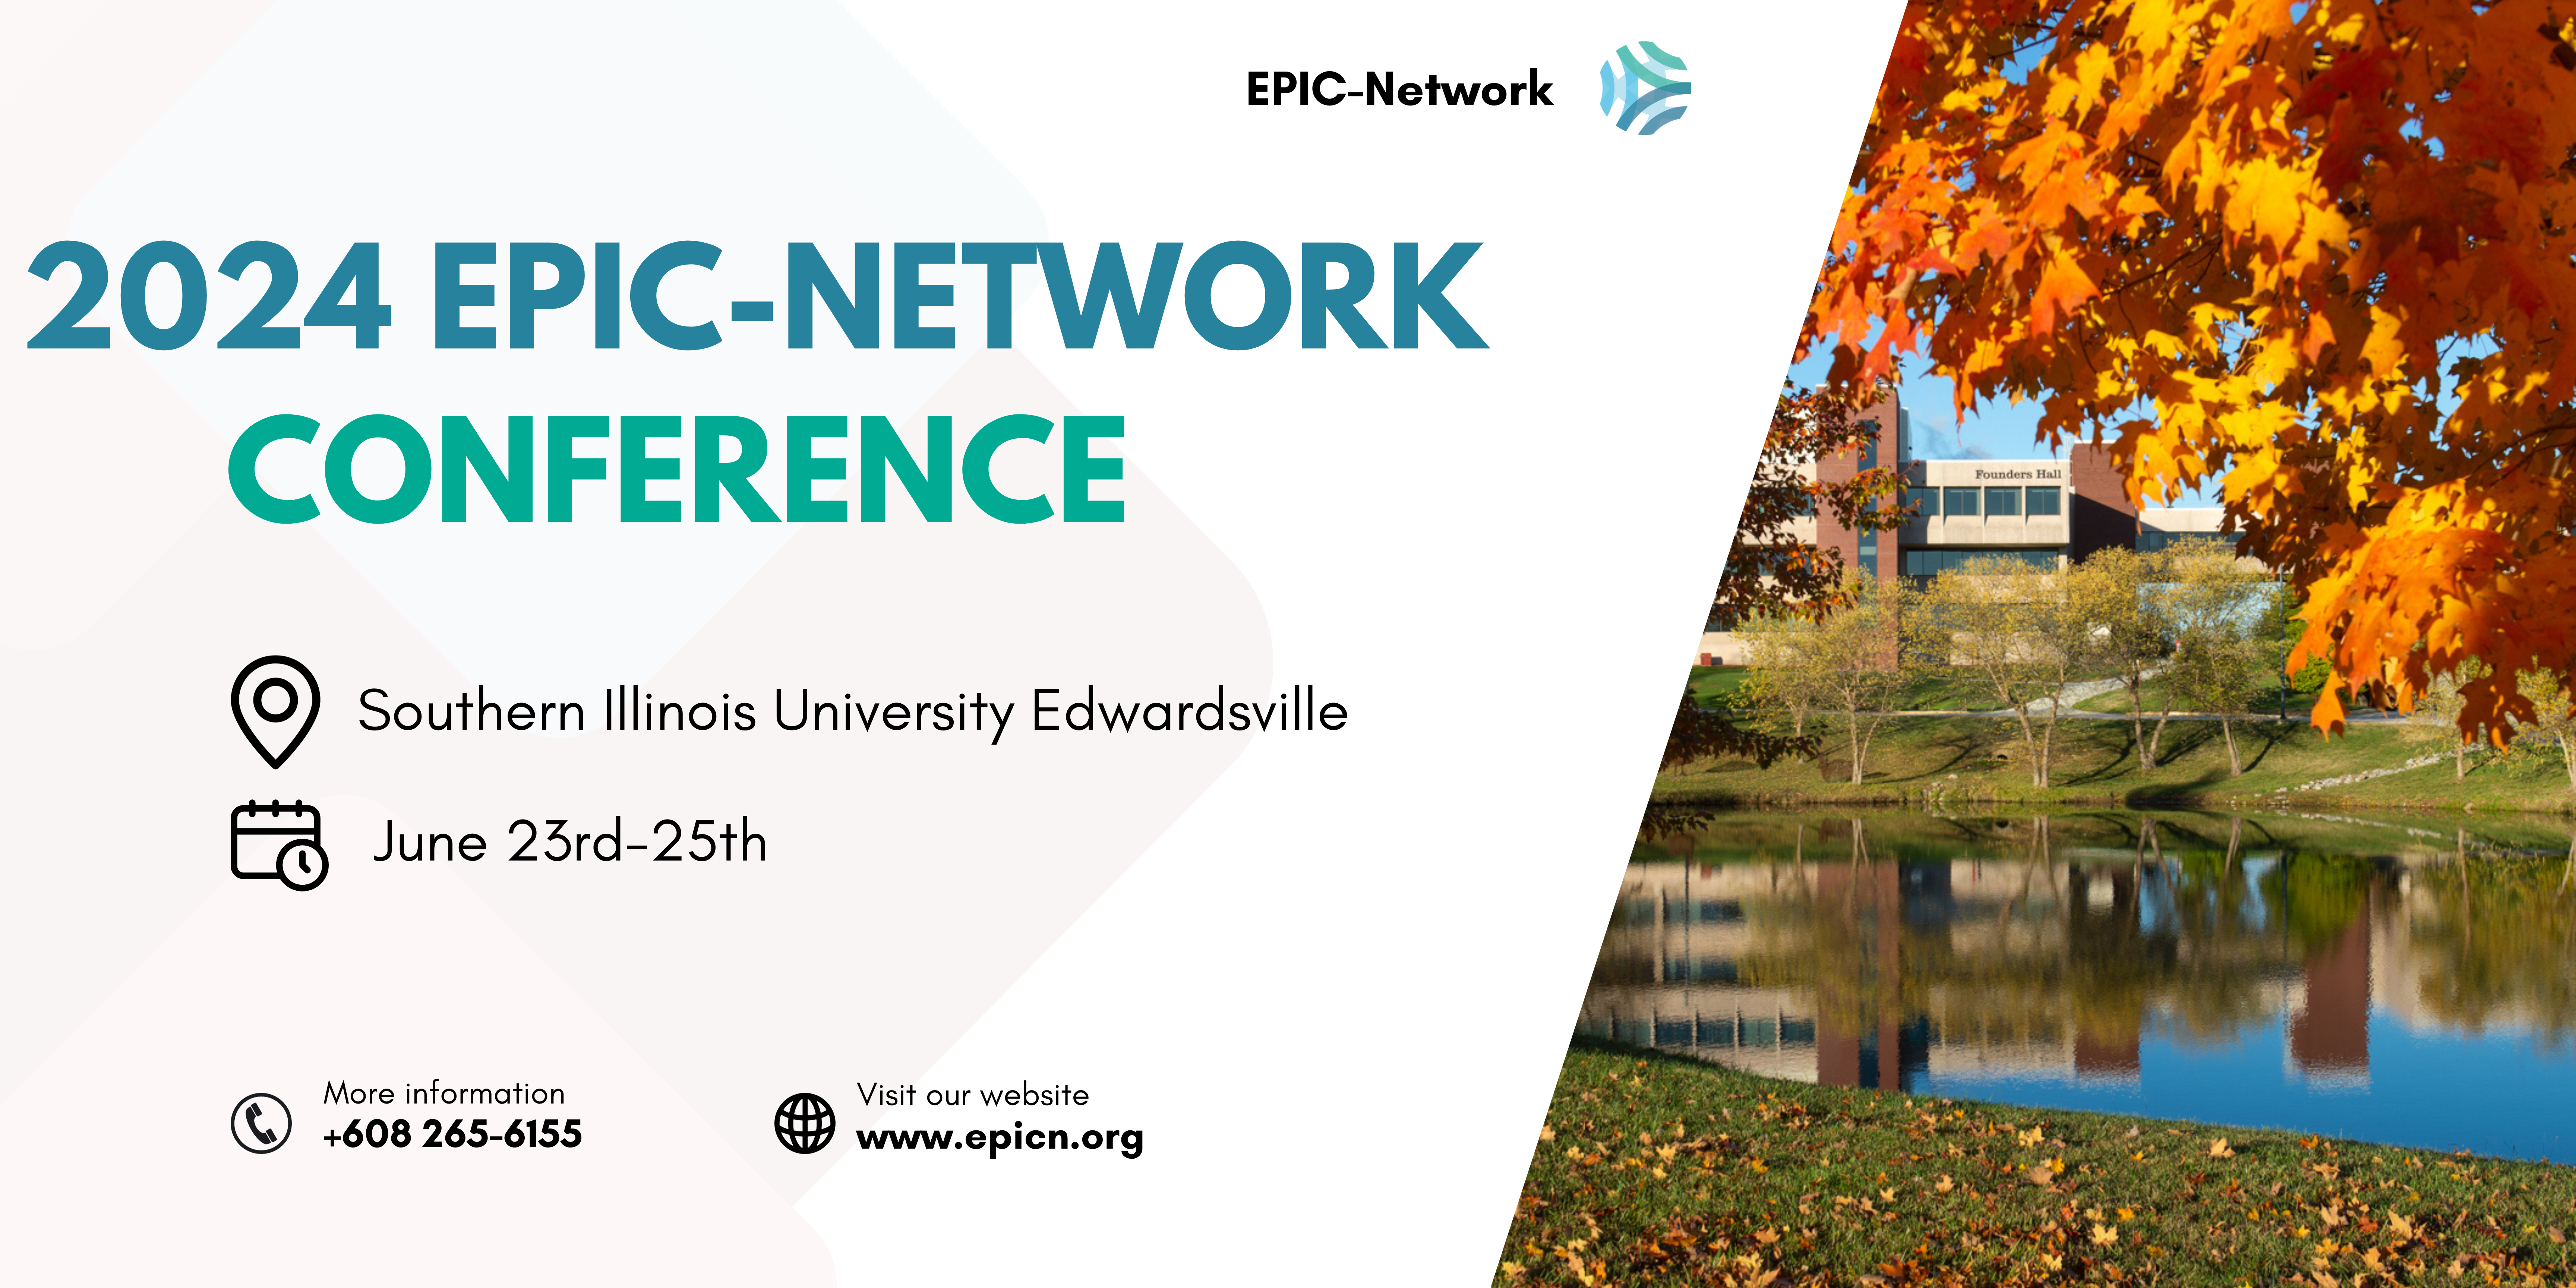 #2024EPICN | 2024 EPIC-Network Conference